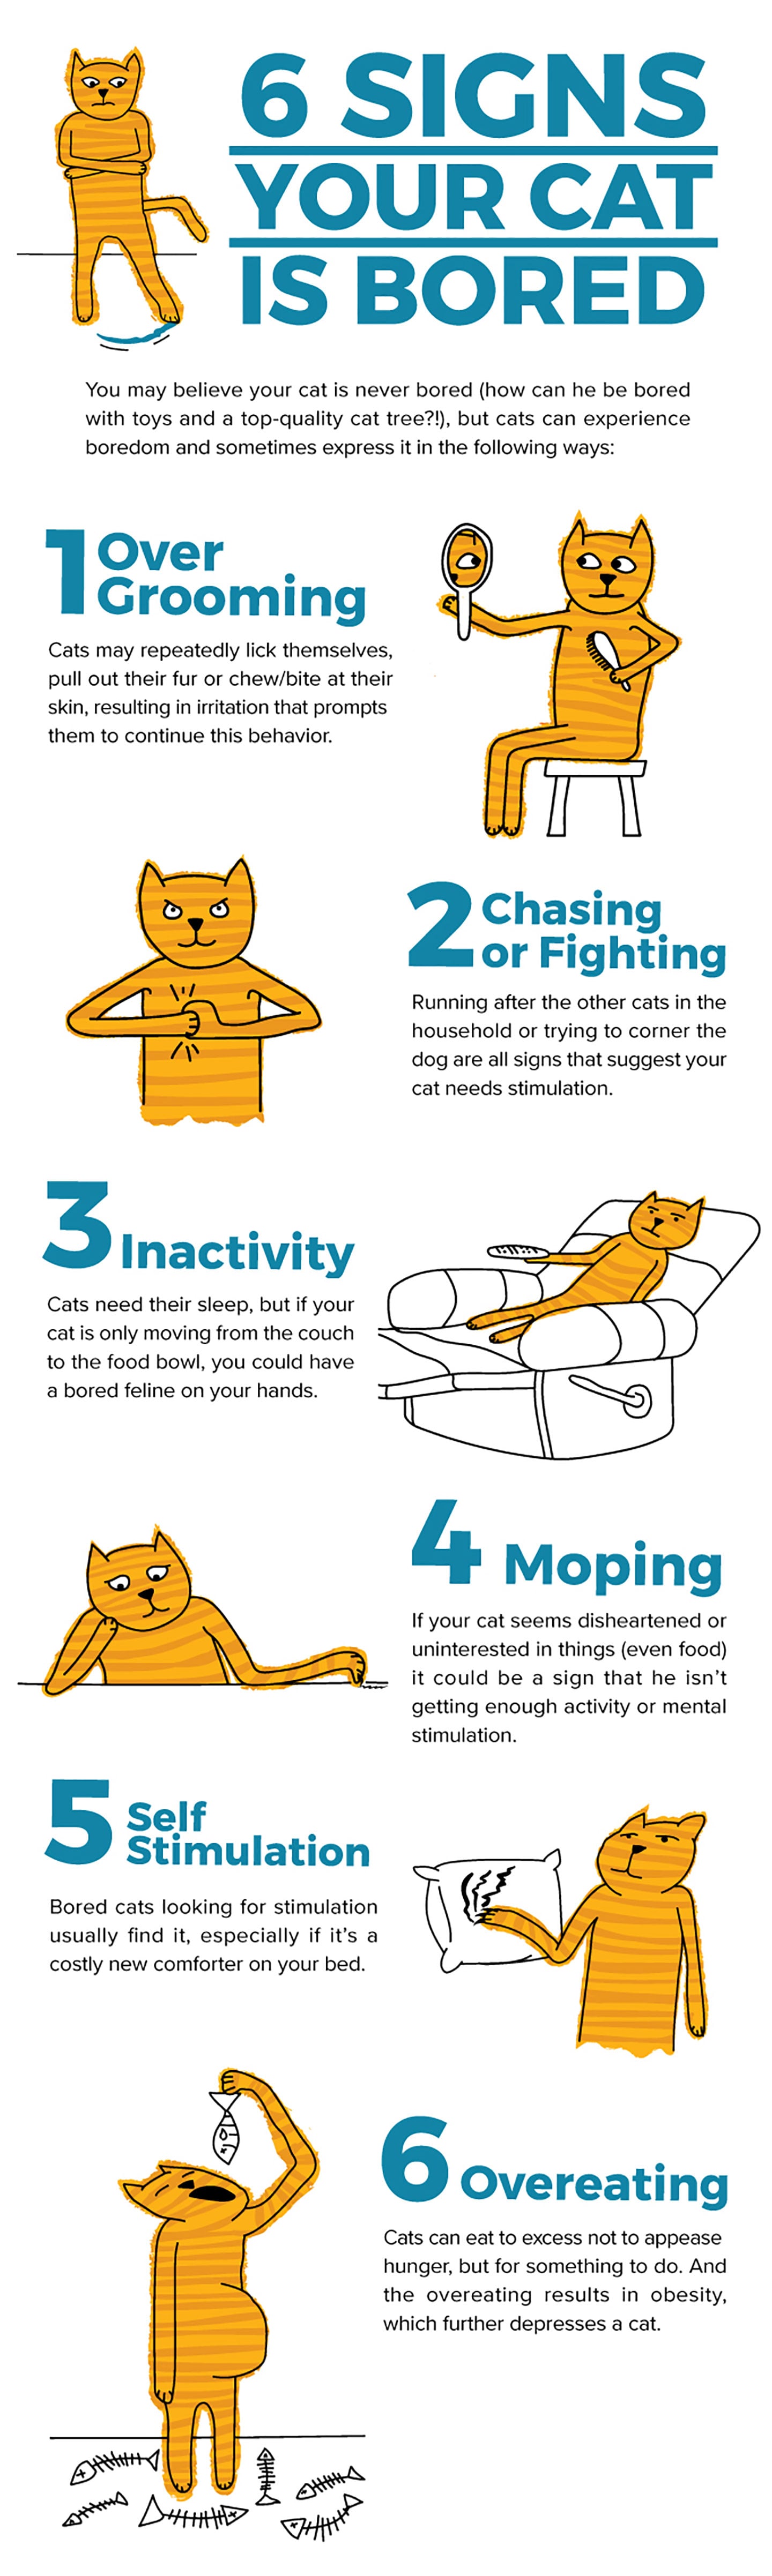 12 Tips on How to Help Bored Cats at Home